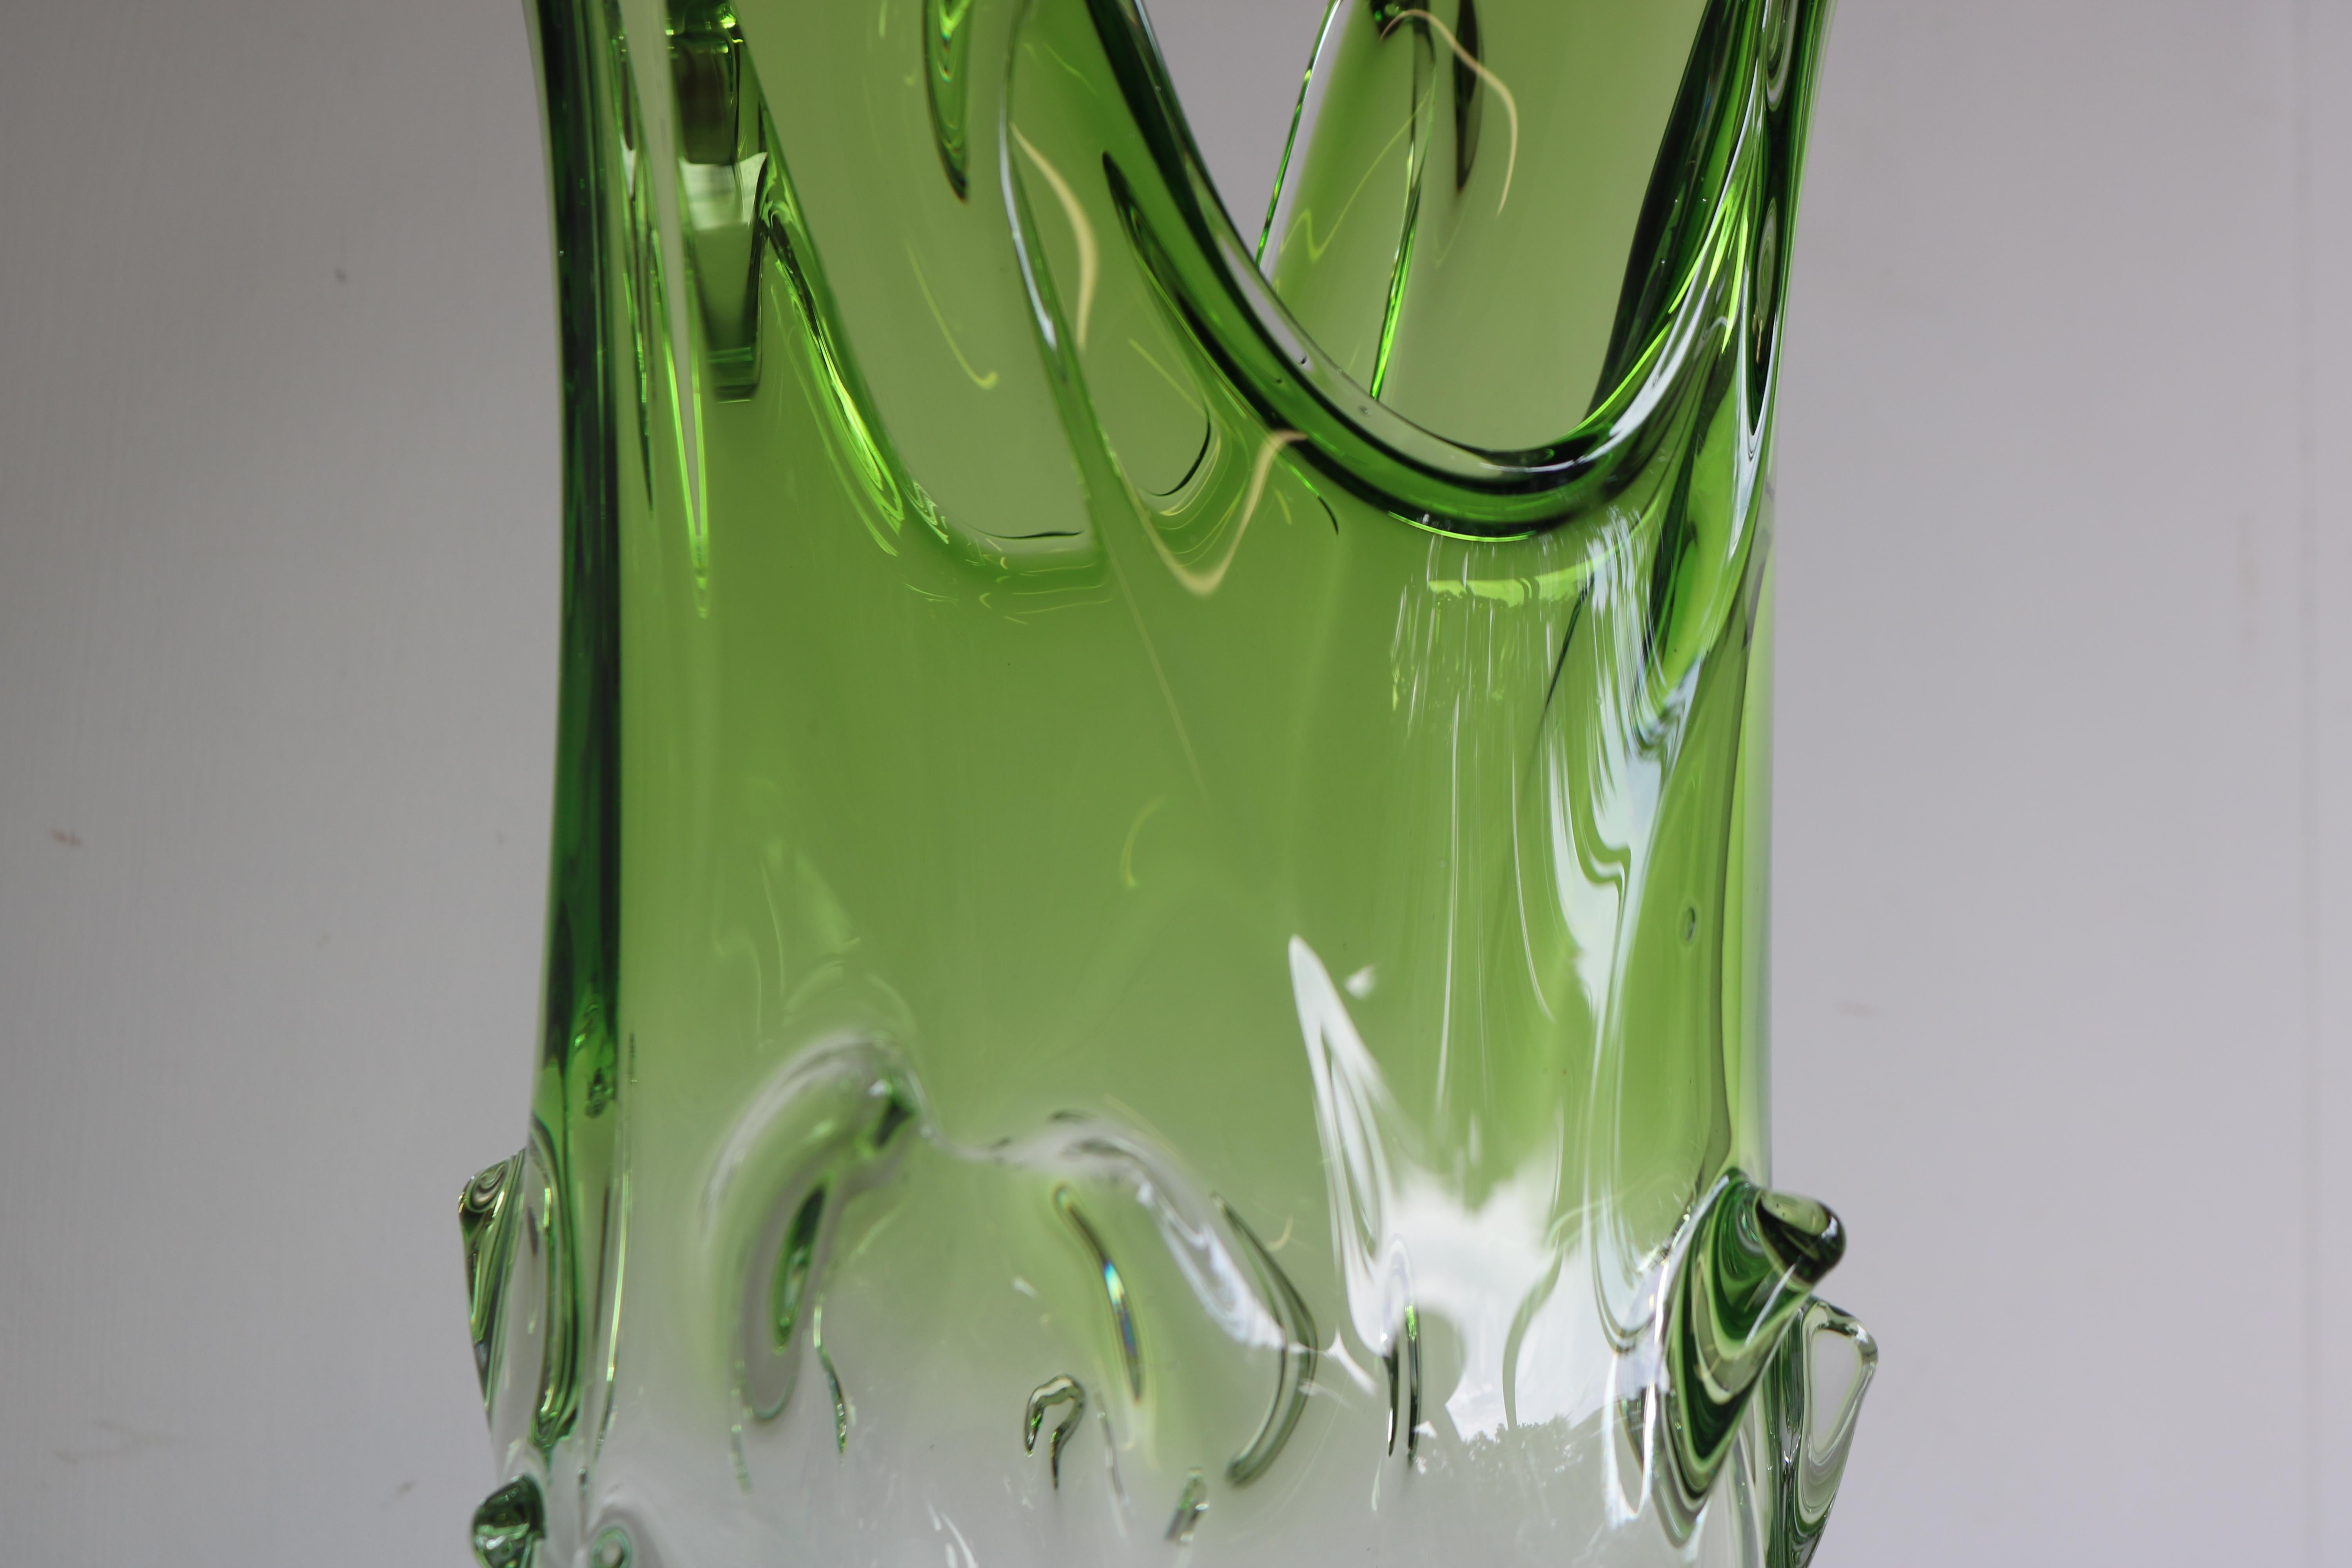 Large 5.4kg Italian Murano Glass vase Attr. Fratelli Toso 1950 Green Sommerso  For Sale 2